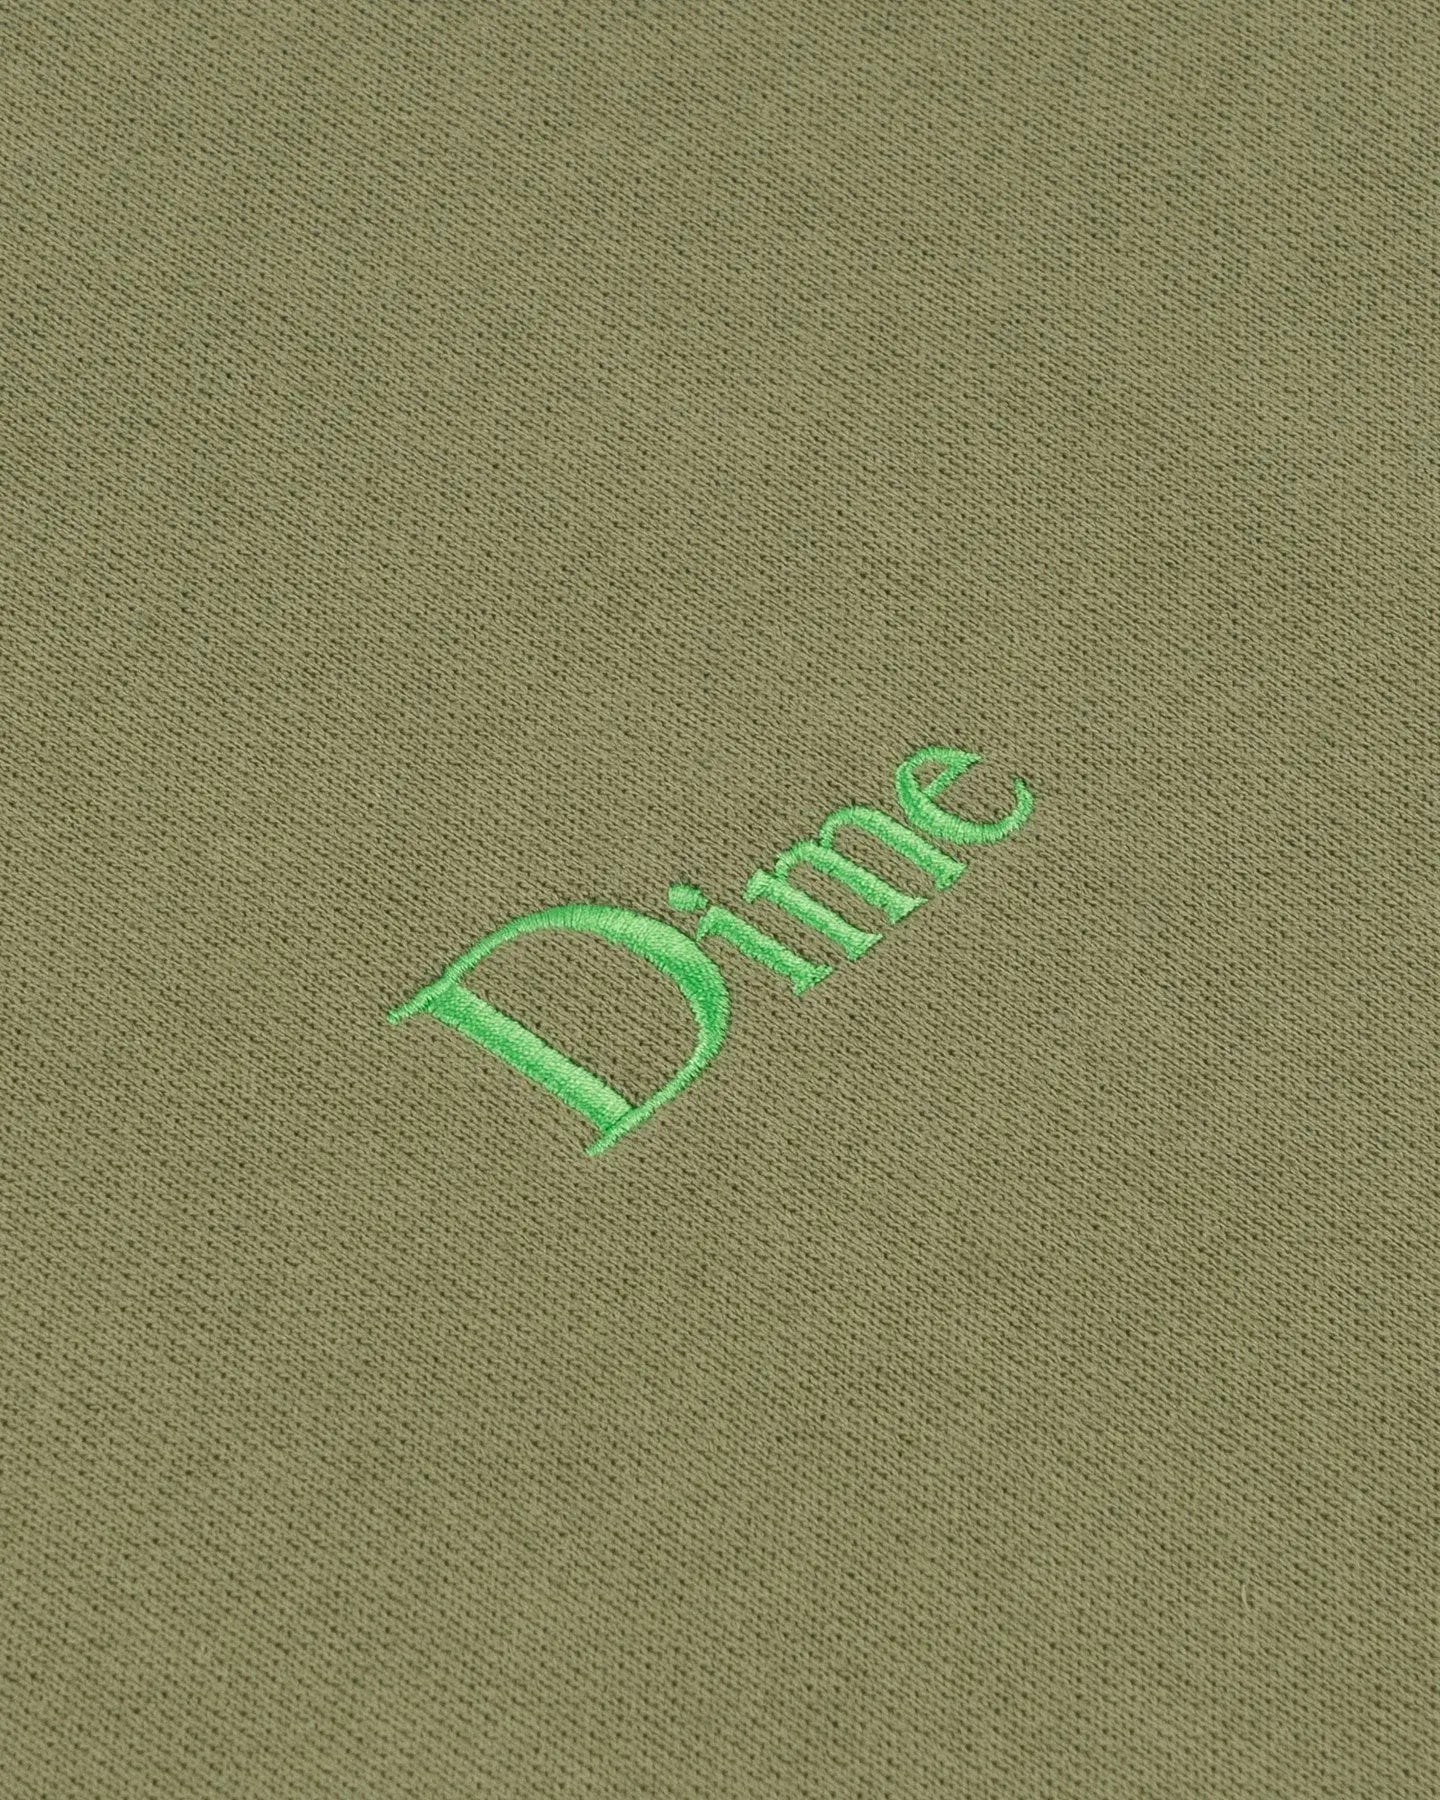 Dime Classic Small Logo Crewneck - Army Green Sweaters